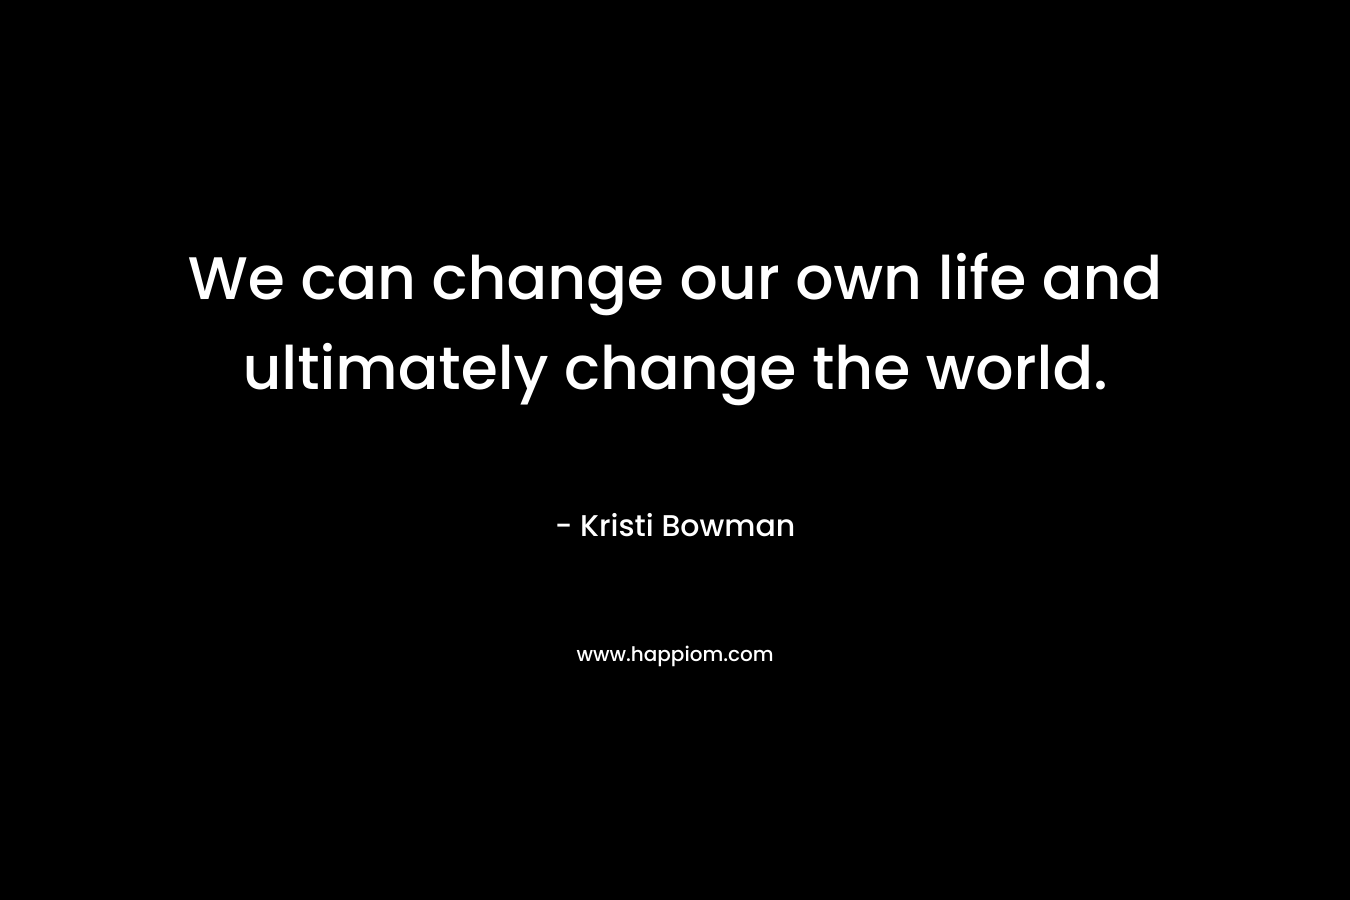 We can change our own life and ultimately change the world.